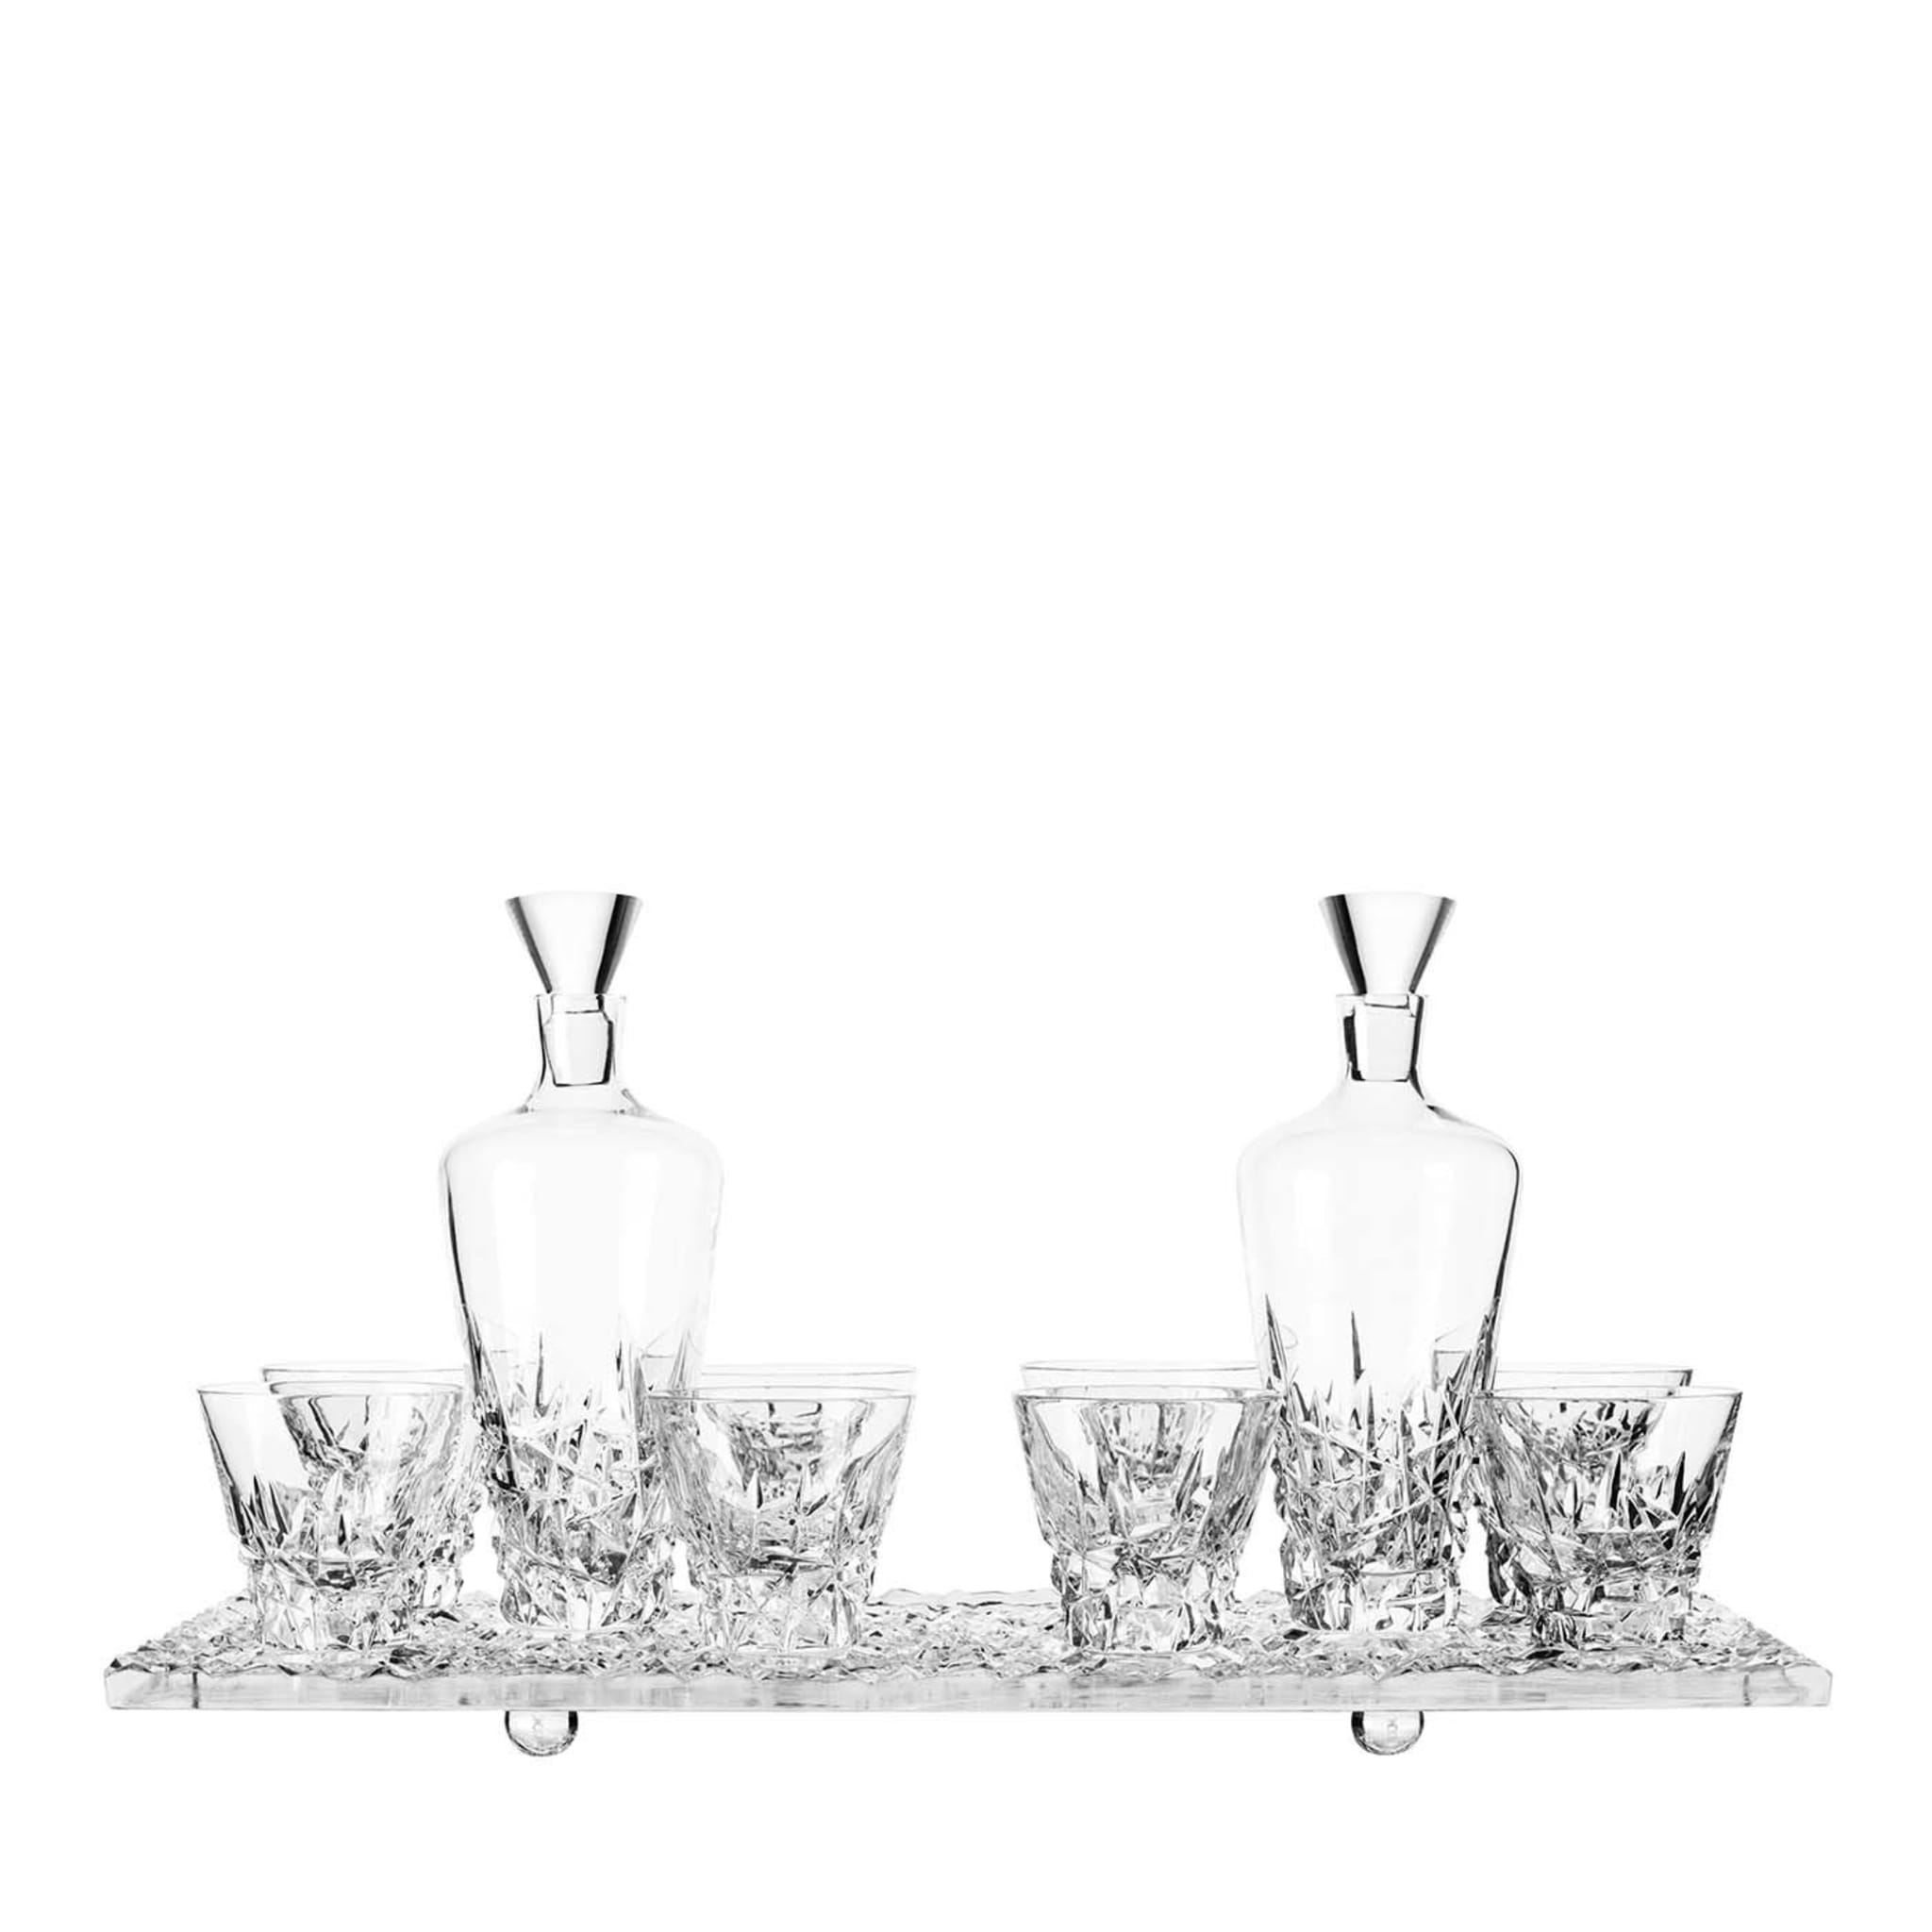 Sinfonia 8/8 Tray Set of 8 Glasses and 2 Bottles - Main view